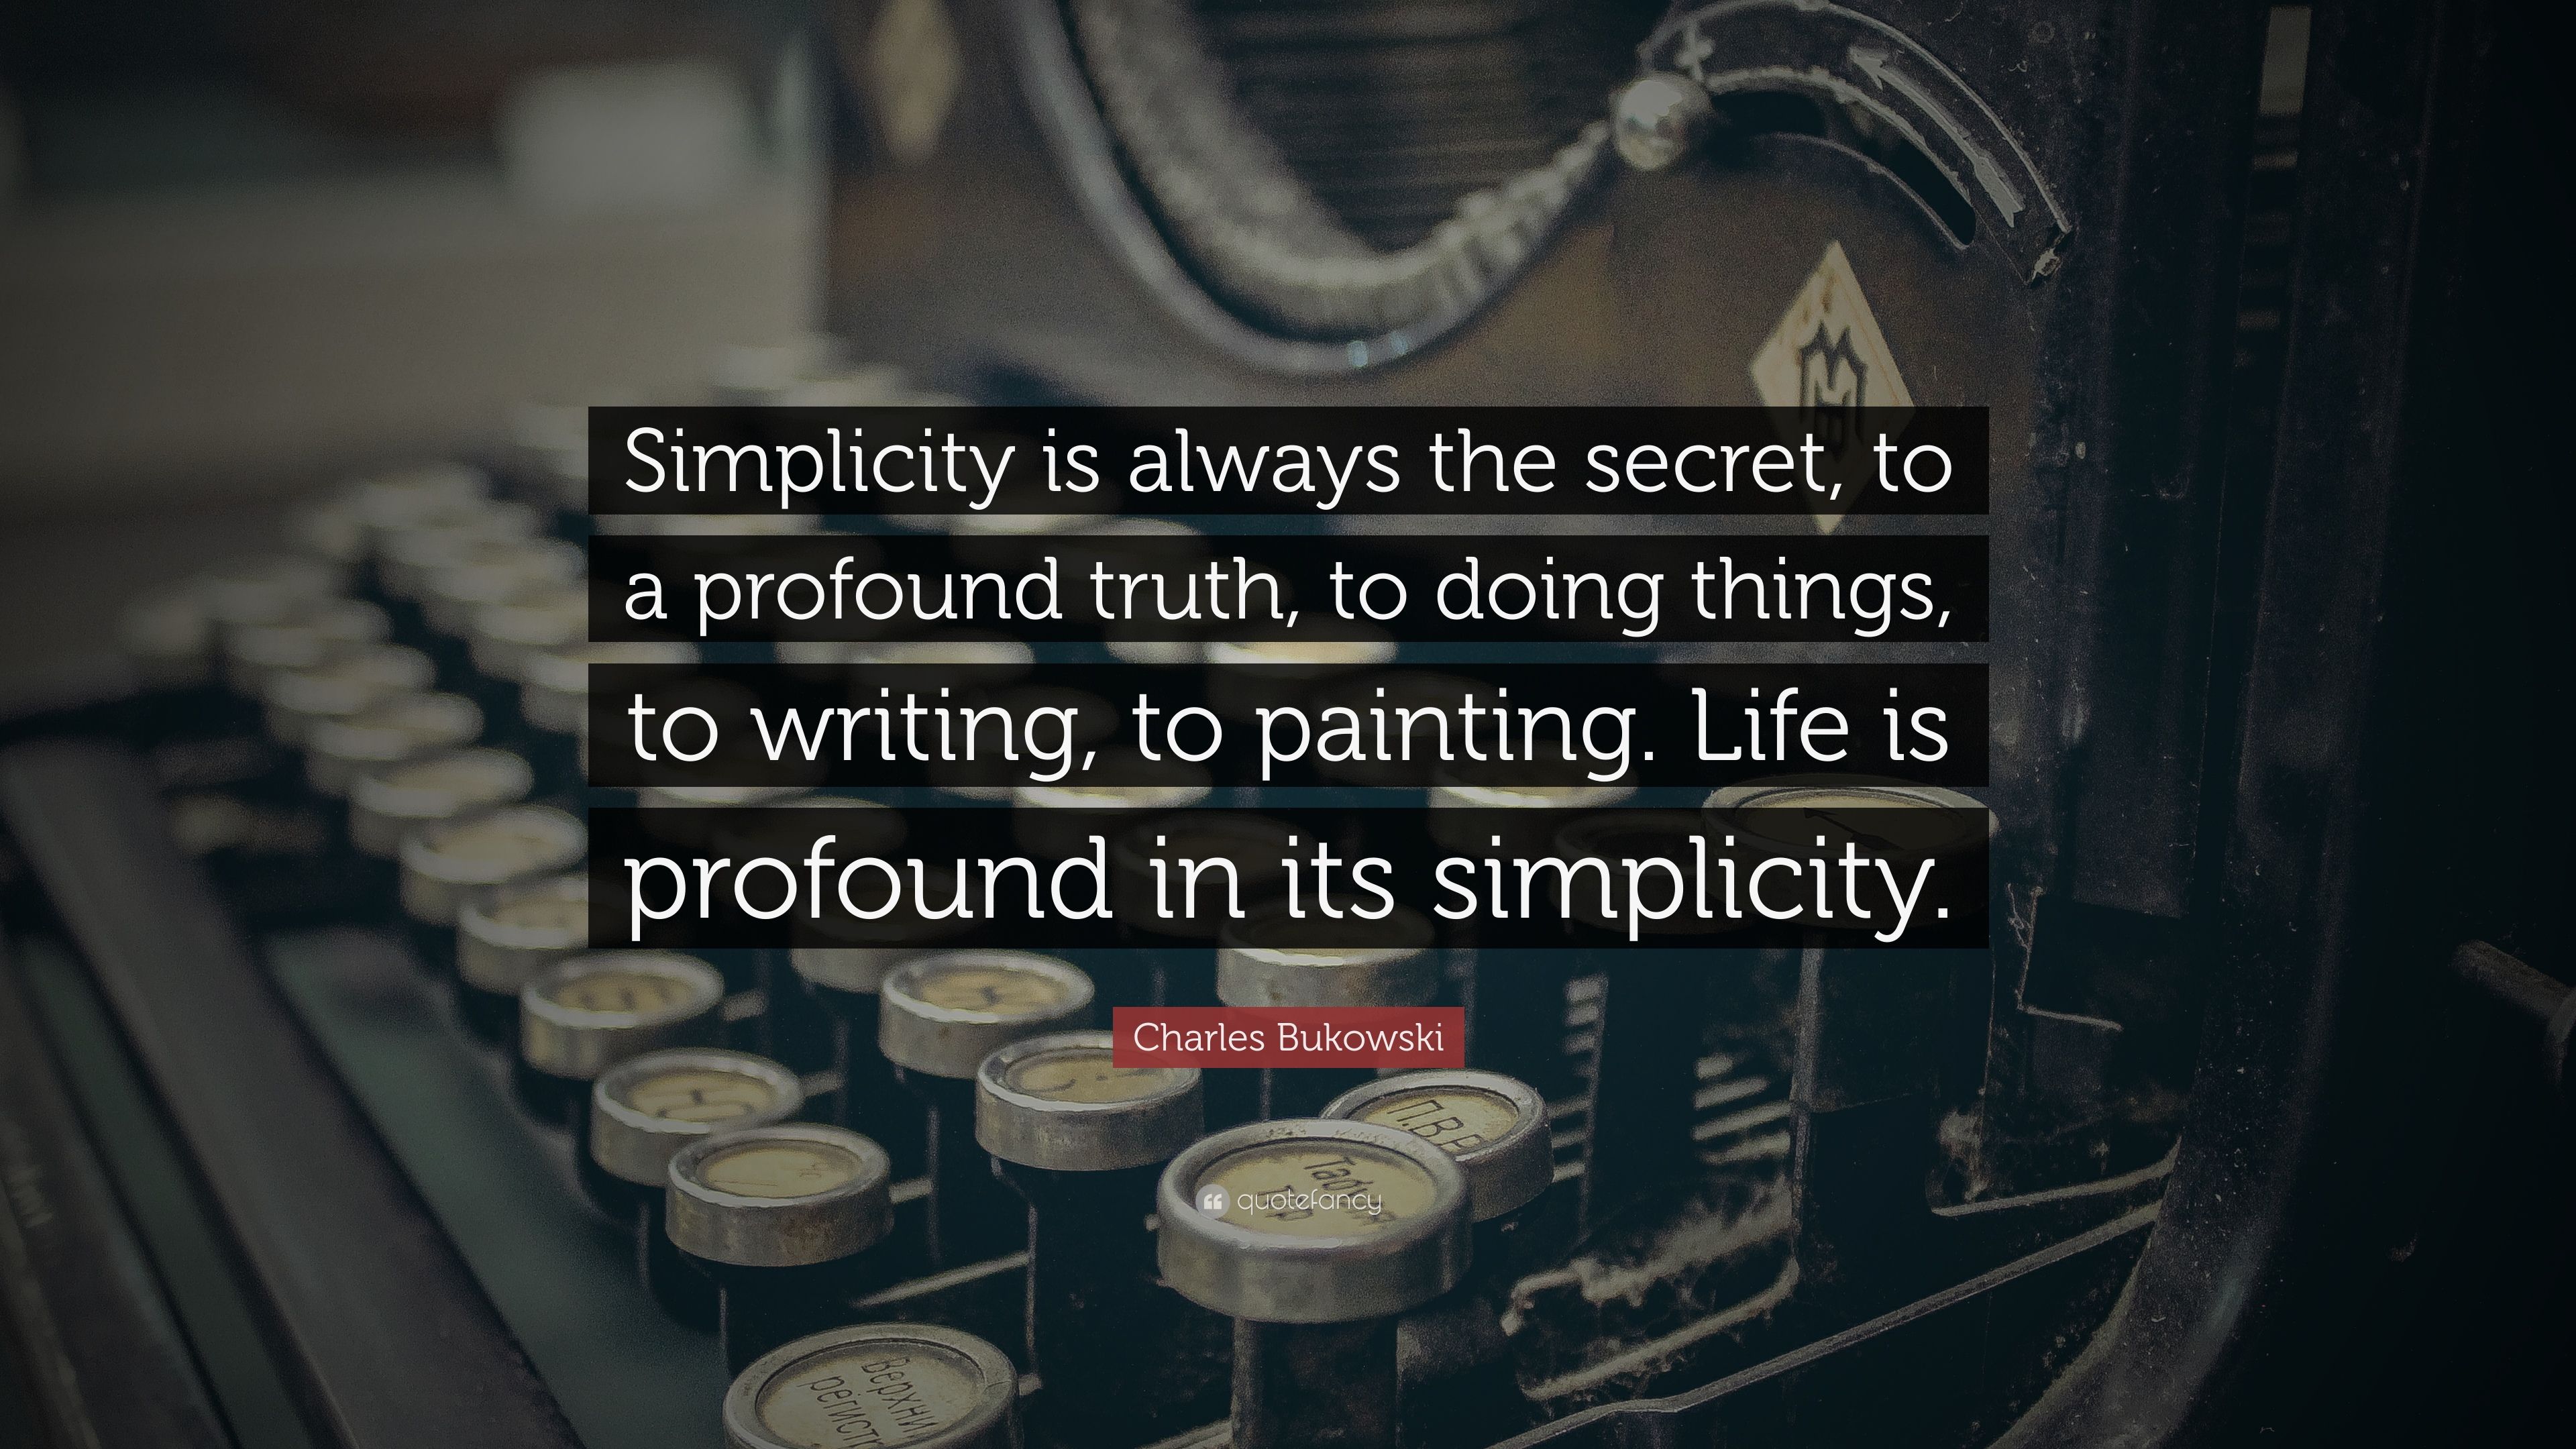 Charles Bukowski Quote: “Simplicity is always the secret, to a